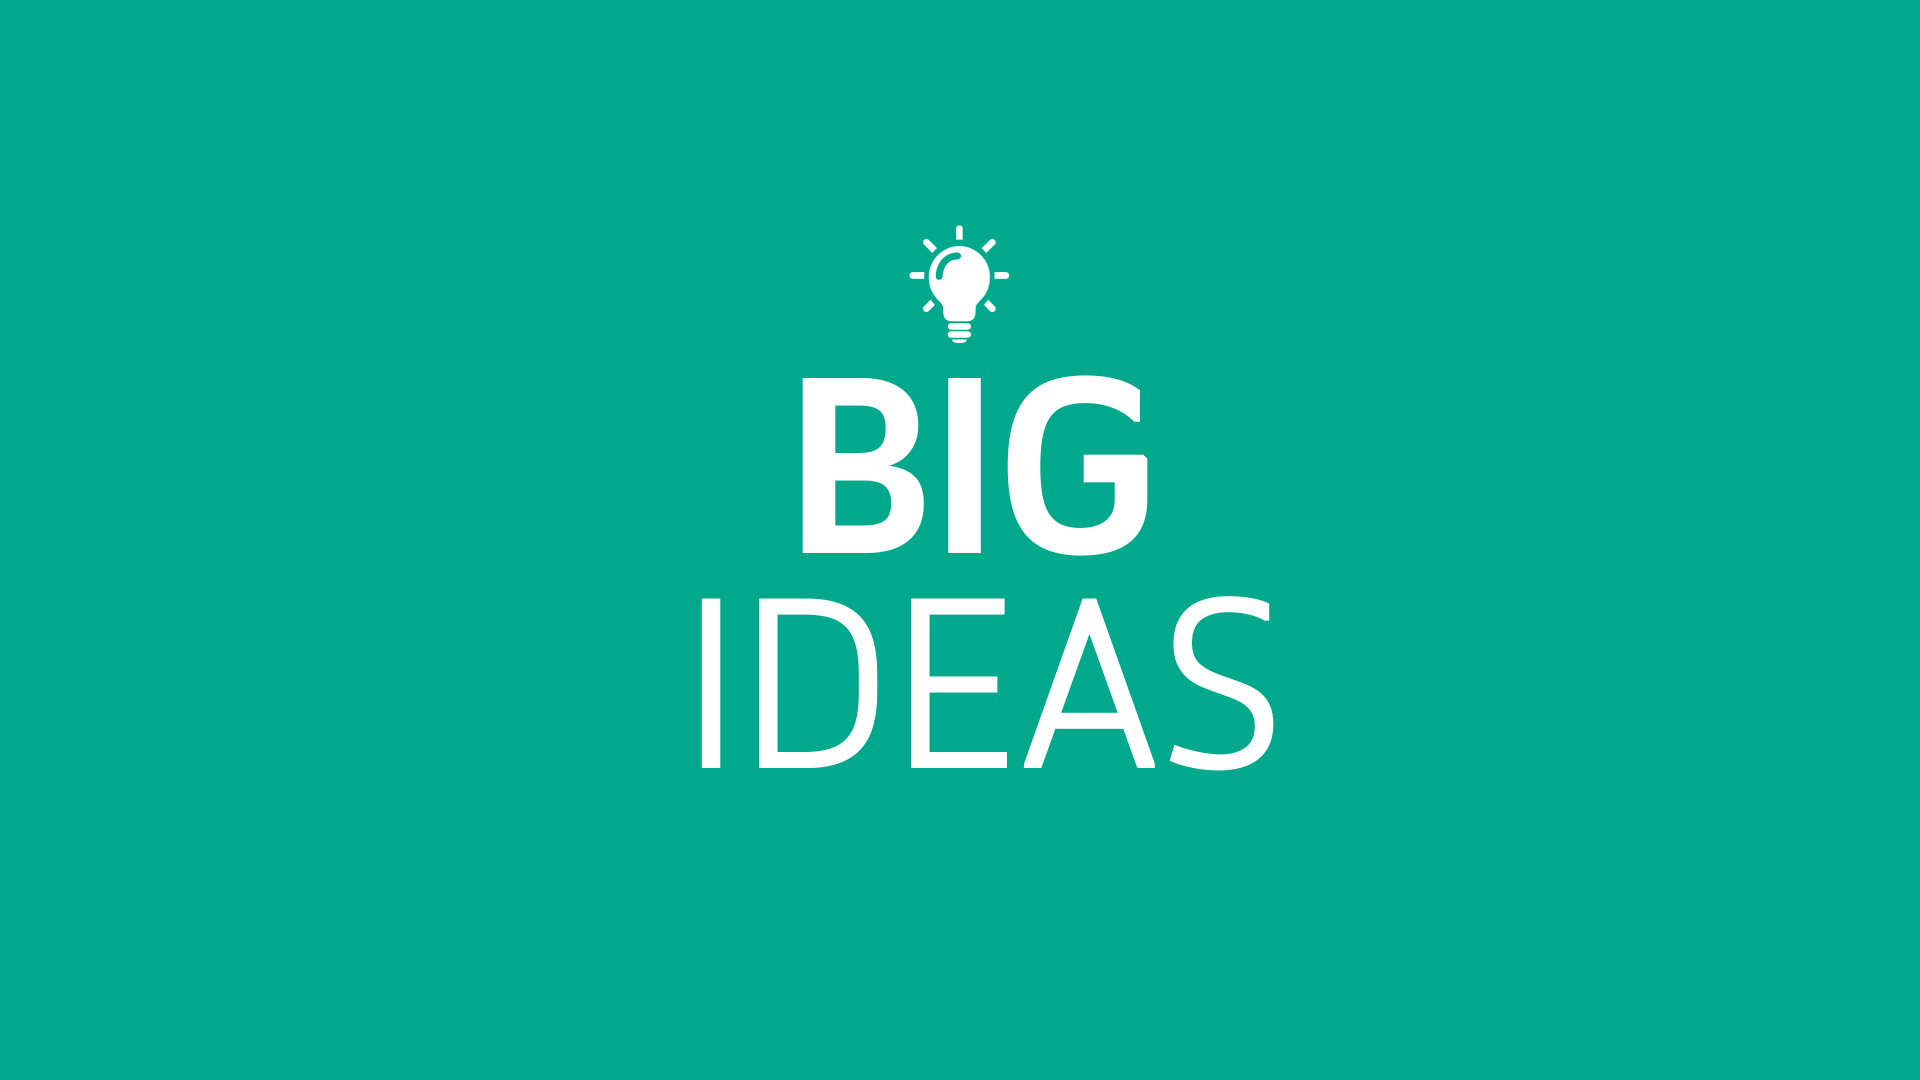 The text Big Ideas in white on a green background